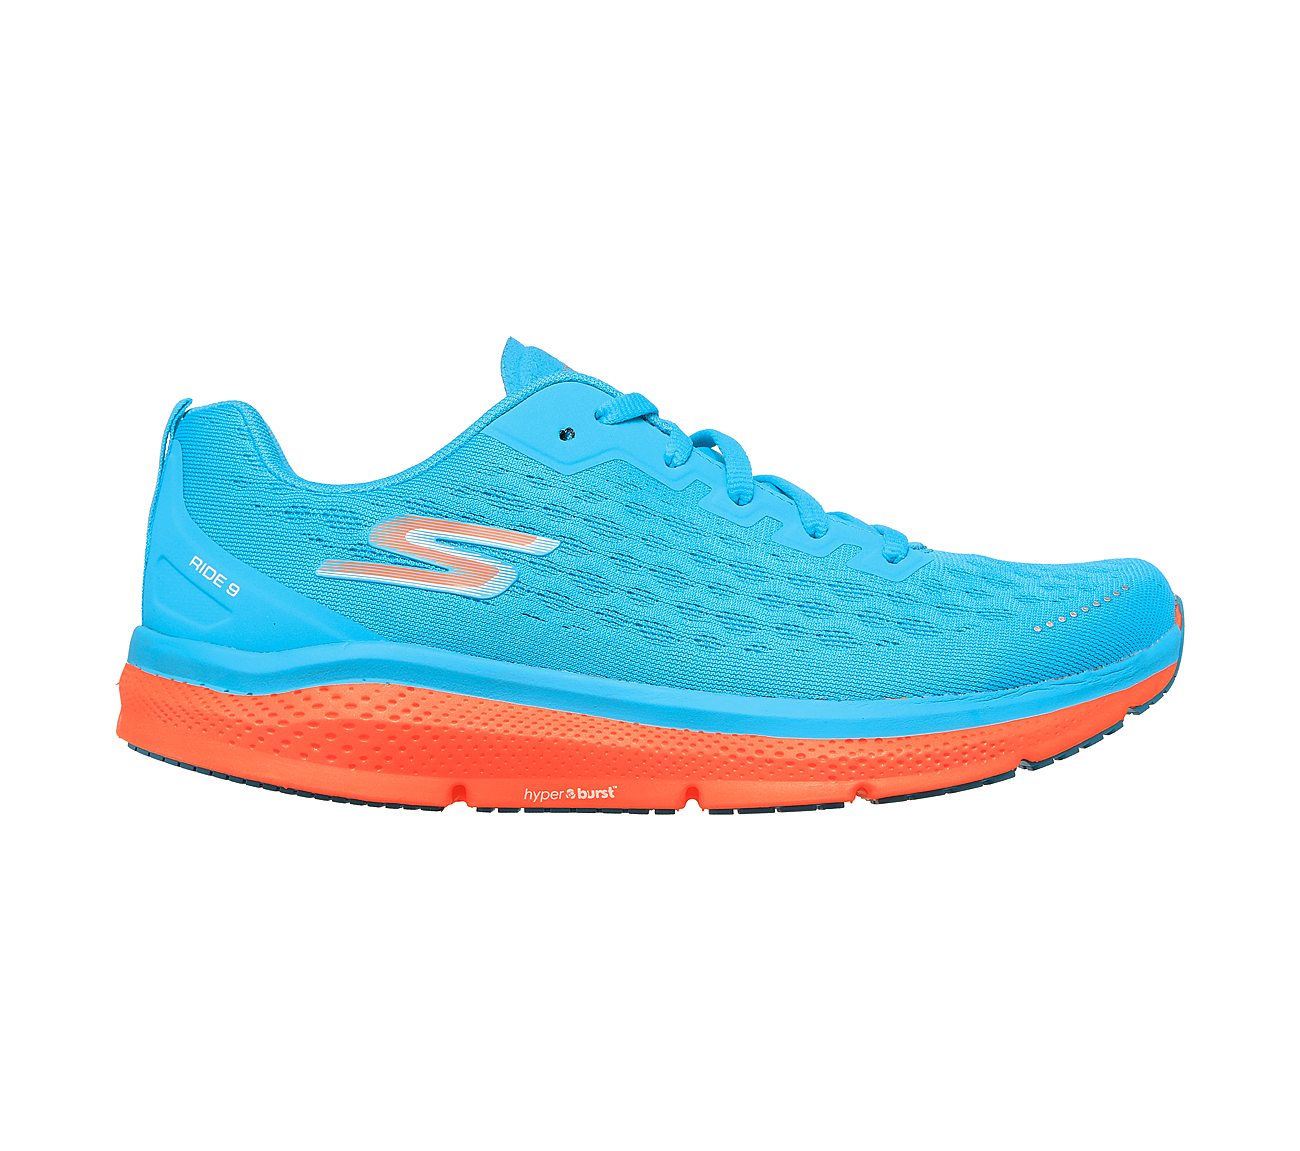 GO RUN RIDE 9 - RIDE 9, BLUE/CORAL Footwear Right View